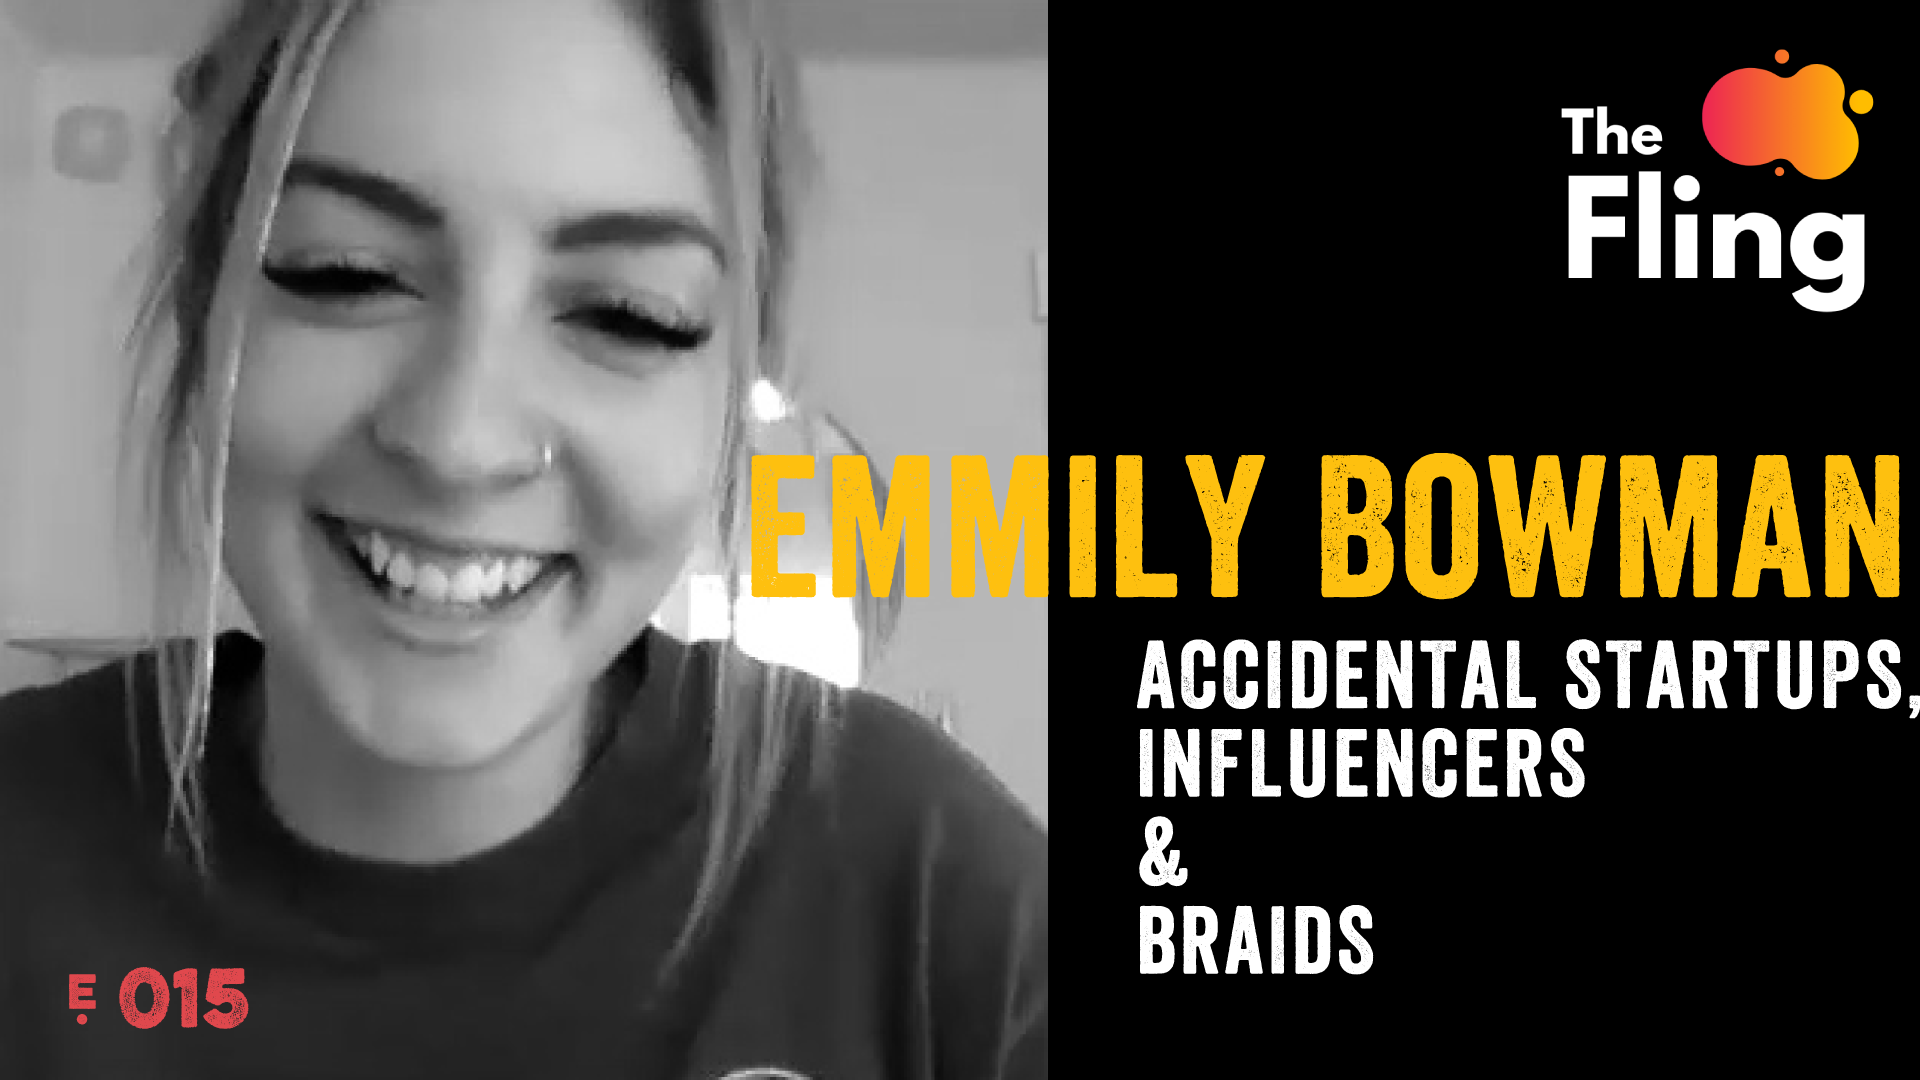 Emmily Bowman and Accidental Startups, Influencers and Braids